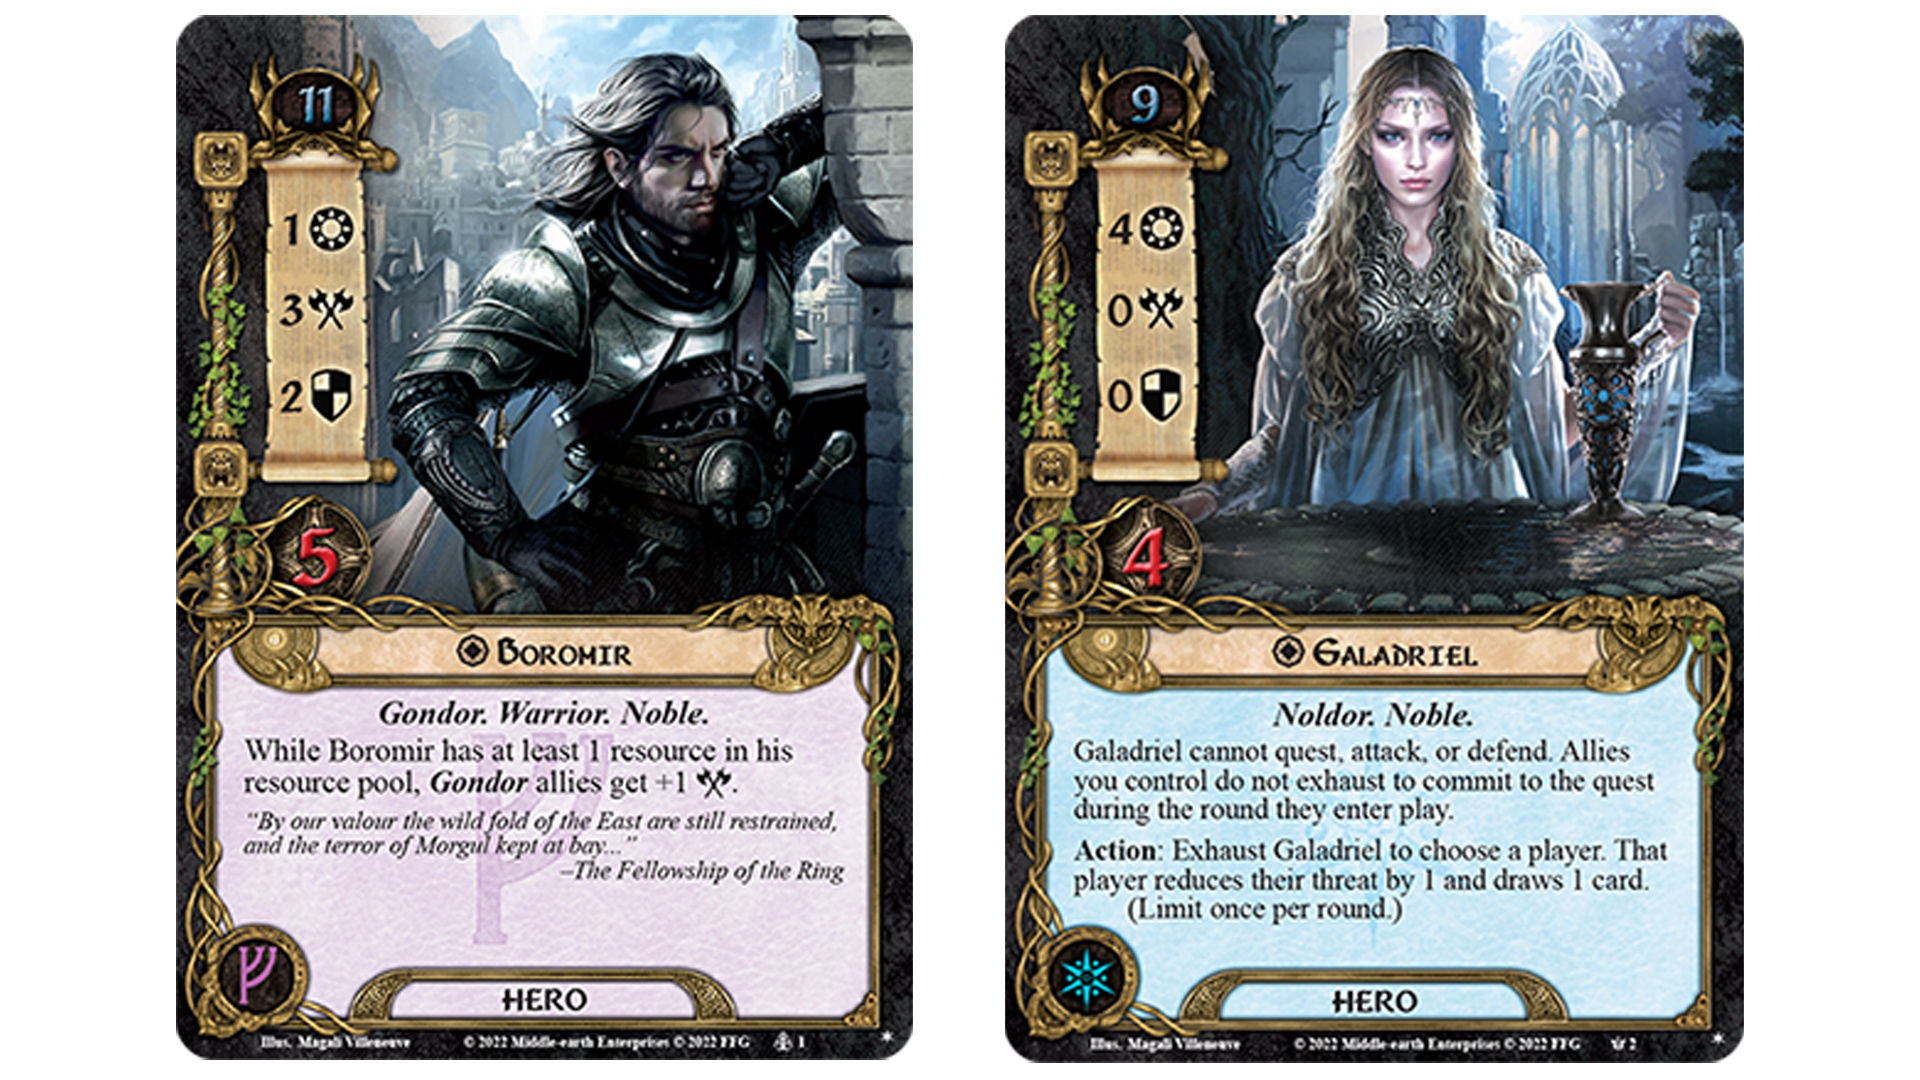 Lord of the Rings: The Card Game starter deck cards